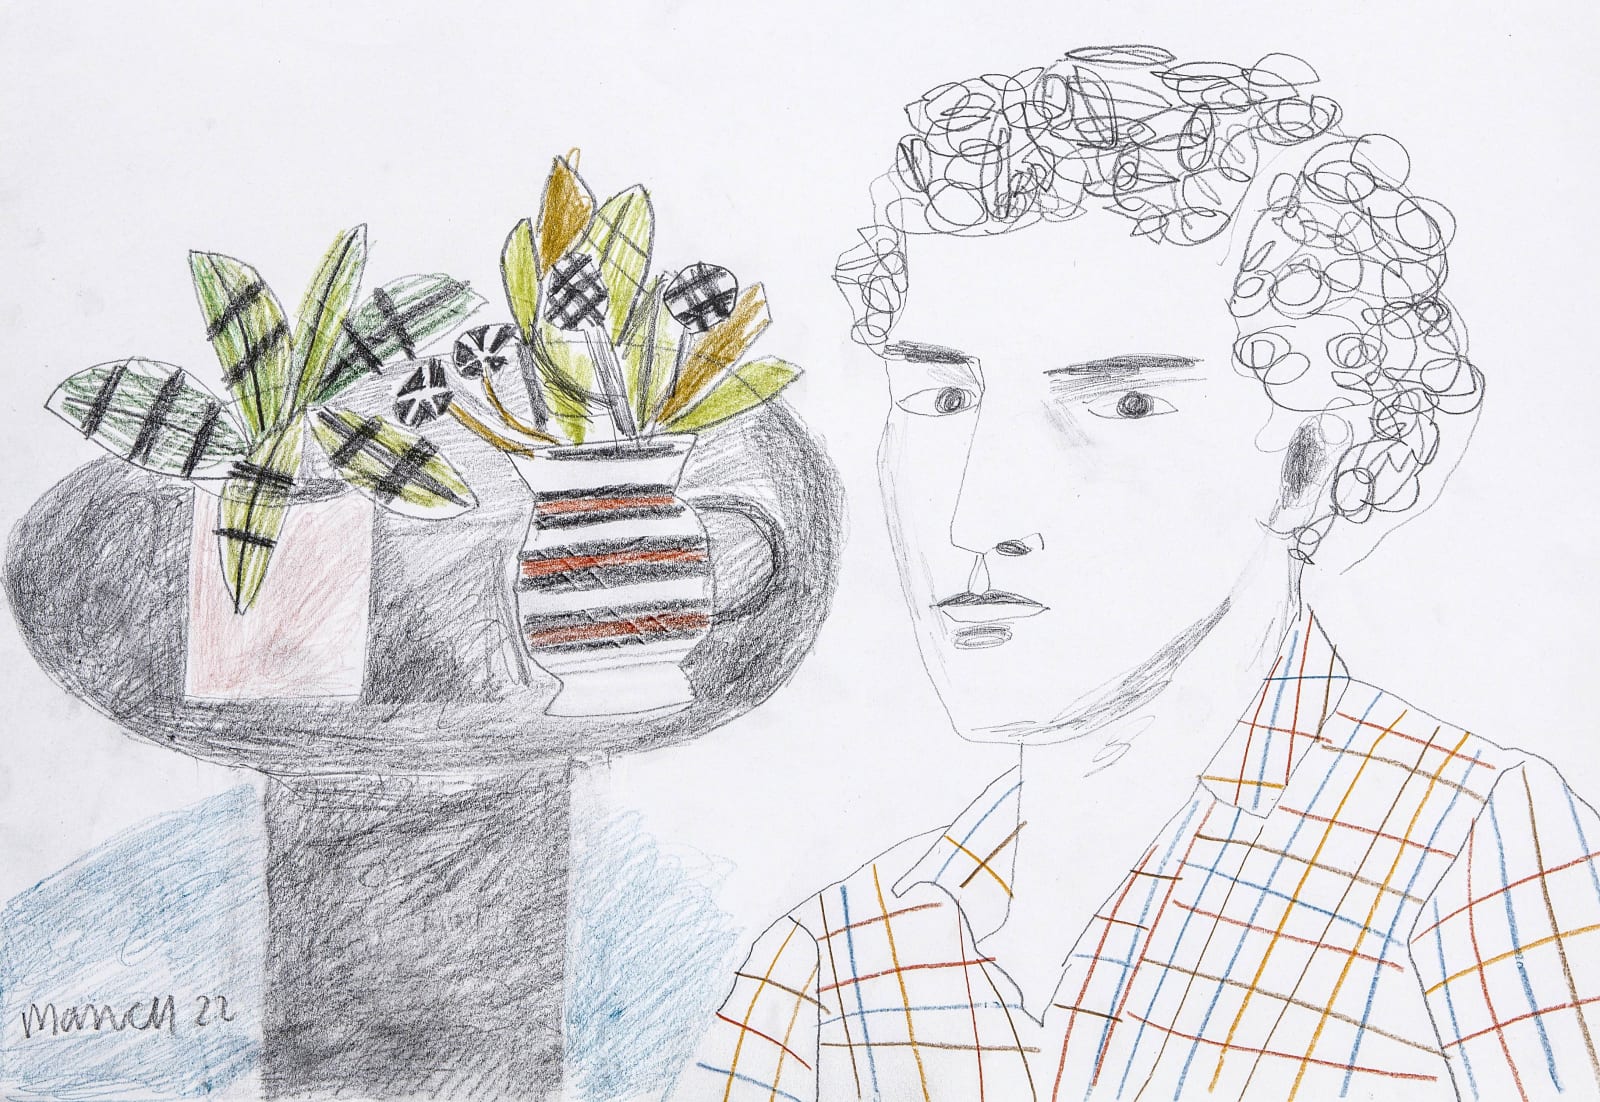 Christopher Marvell, Checked Shirt and Christopher Wood Flowers in Striped Jug, 2022